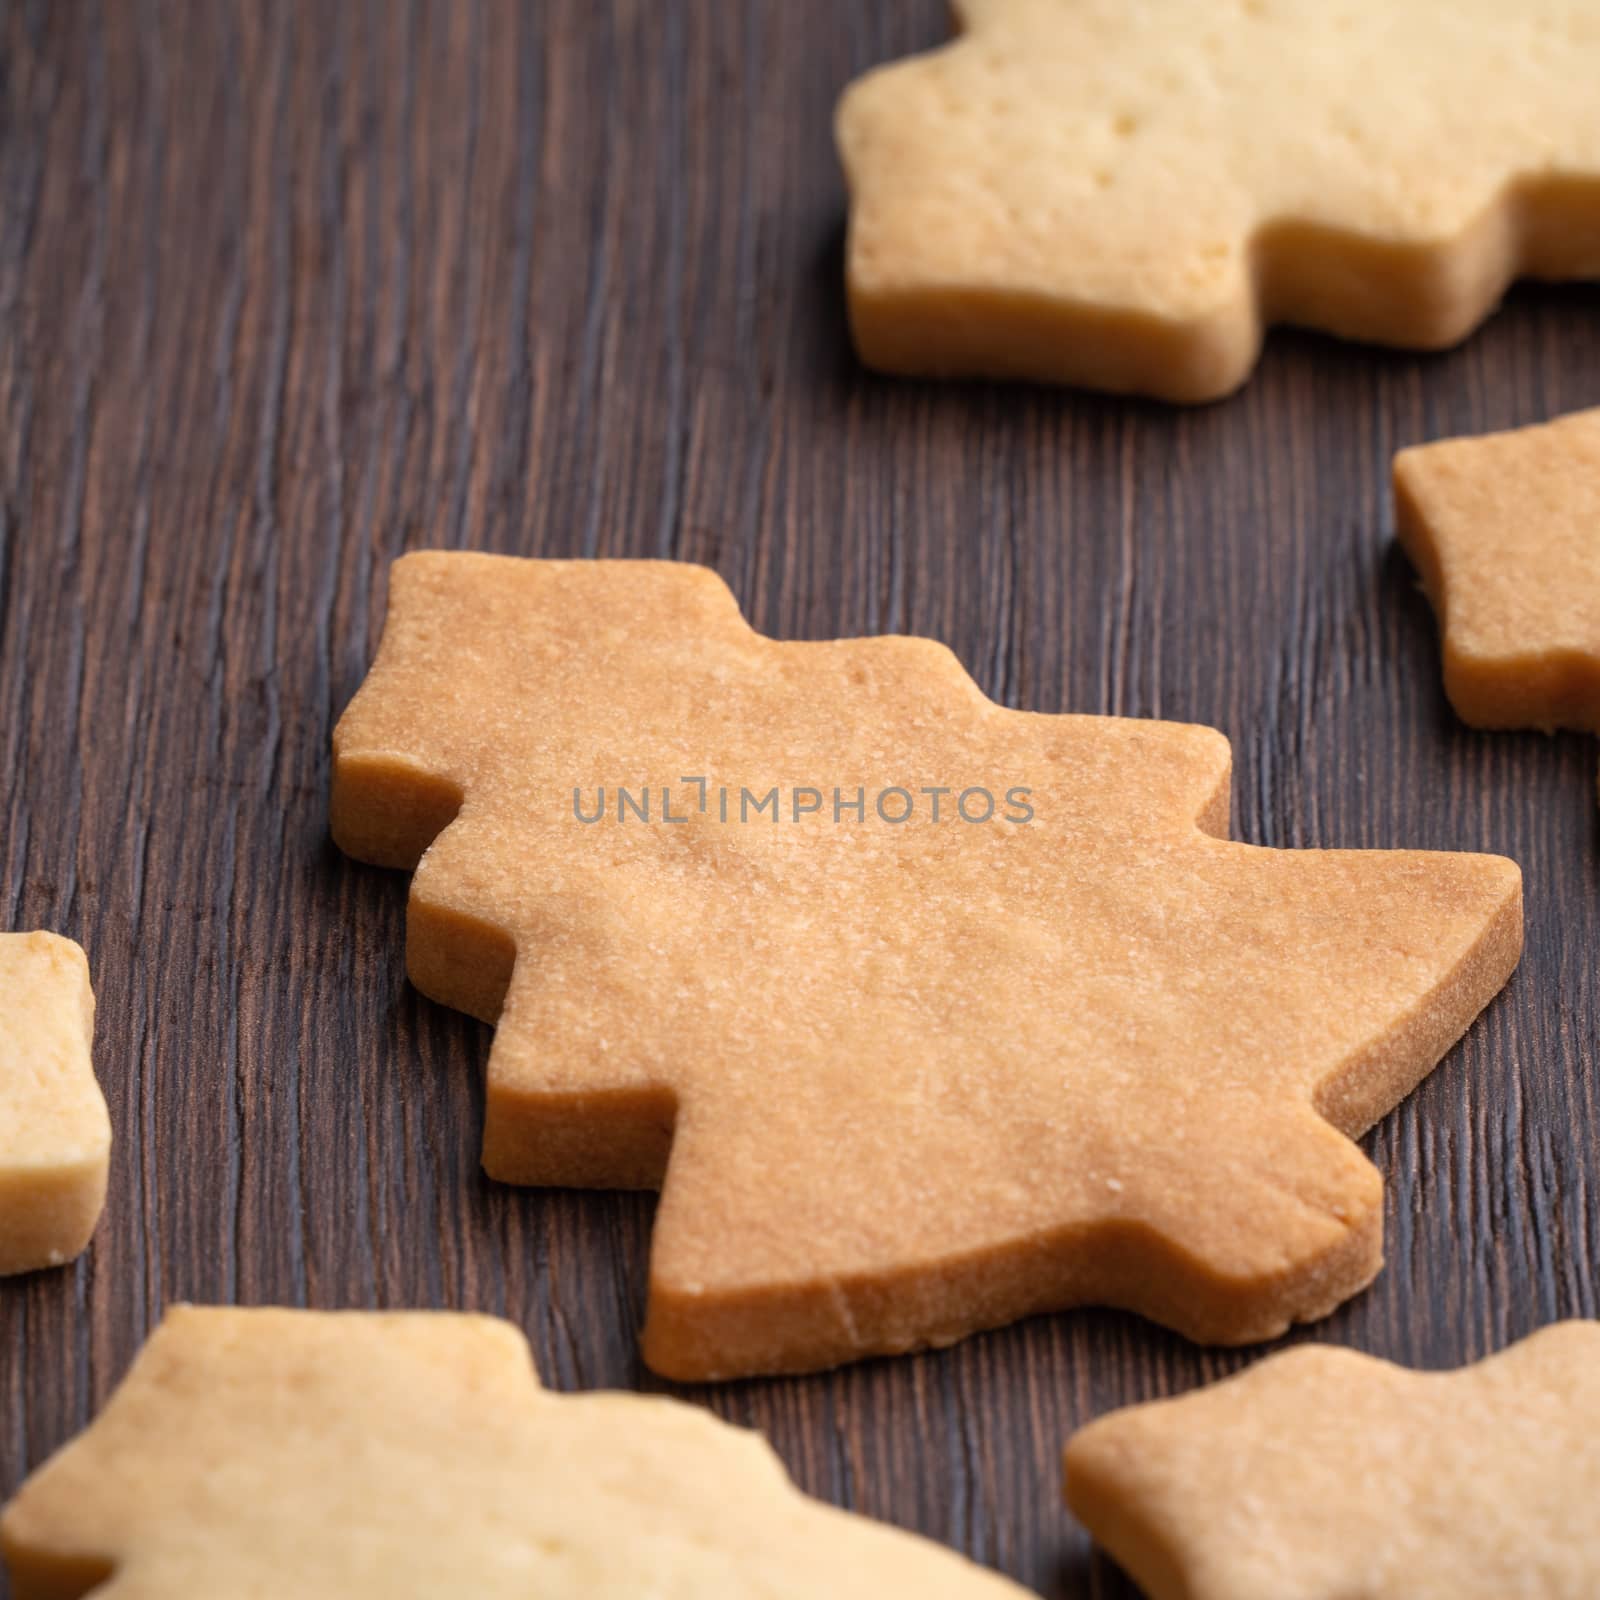 Top view of decorated Christmas tree gingerbread cookie on wooden table background with copy space, concept of holiday celebration.